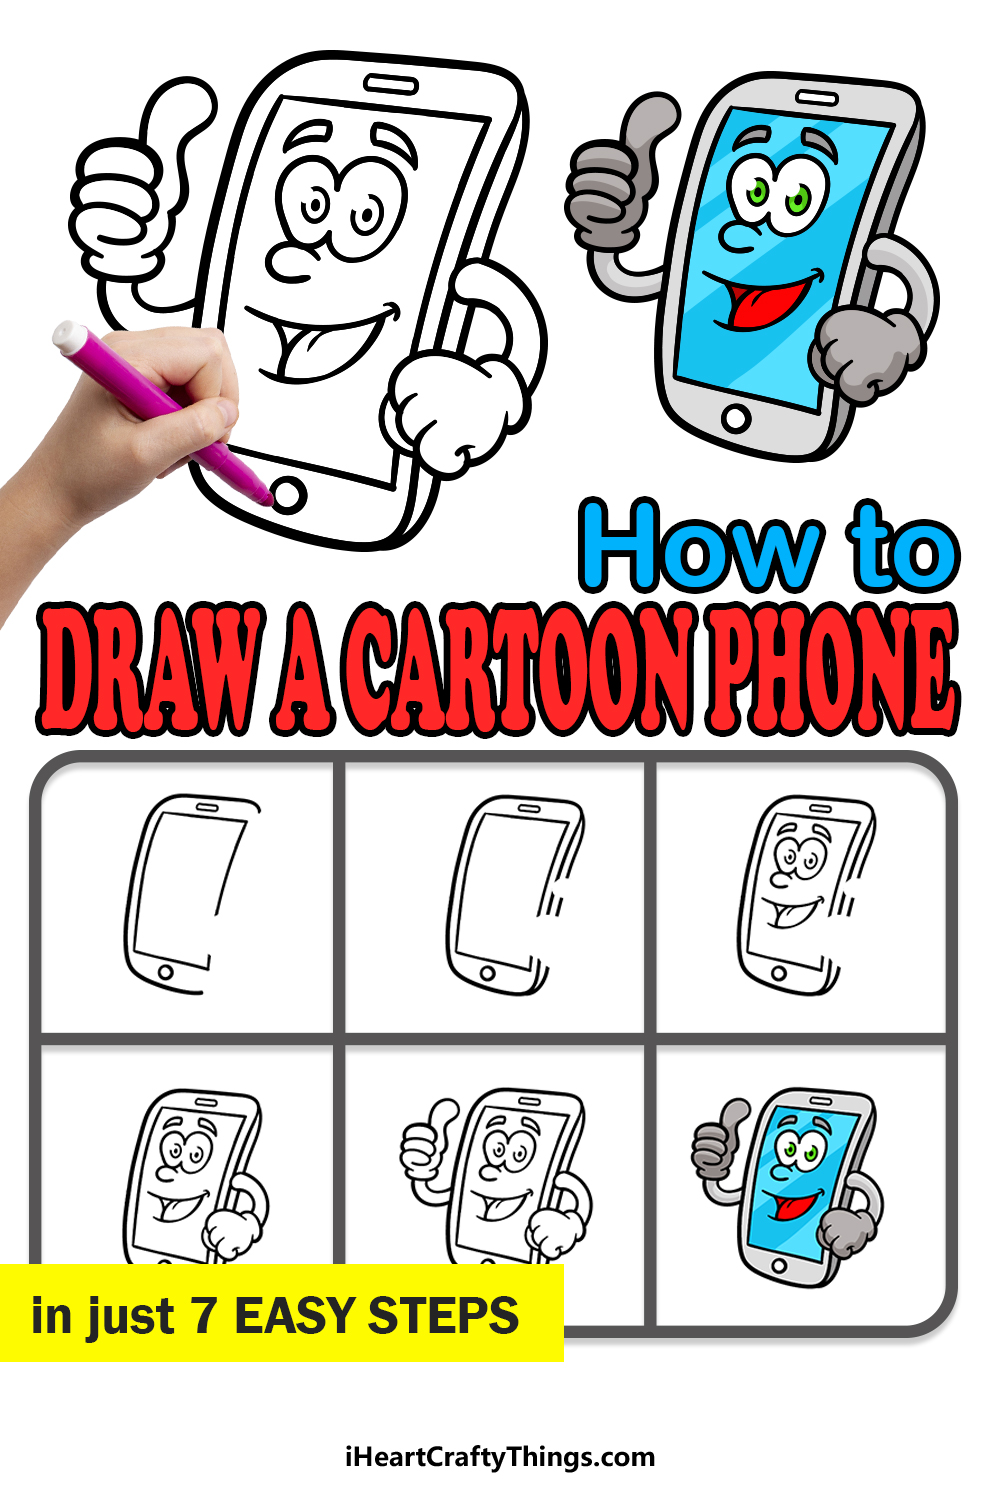 how to draw a cartoon phone in 7 easy steps